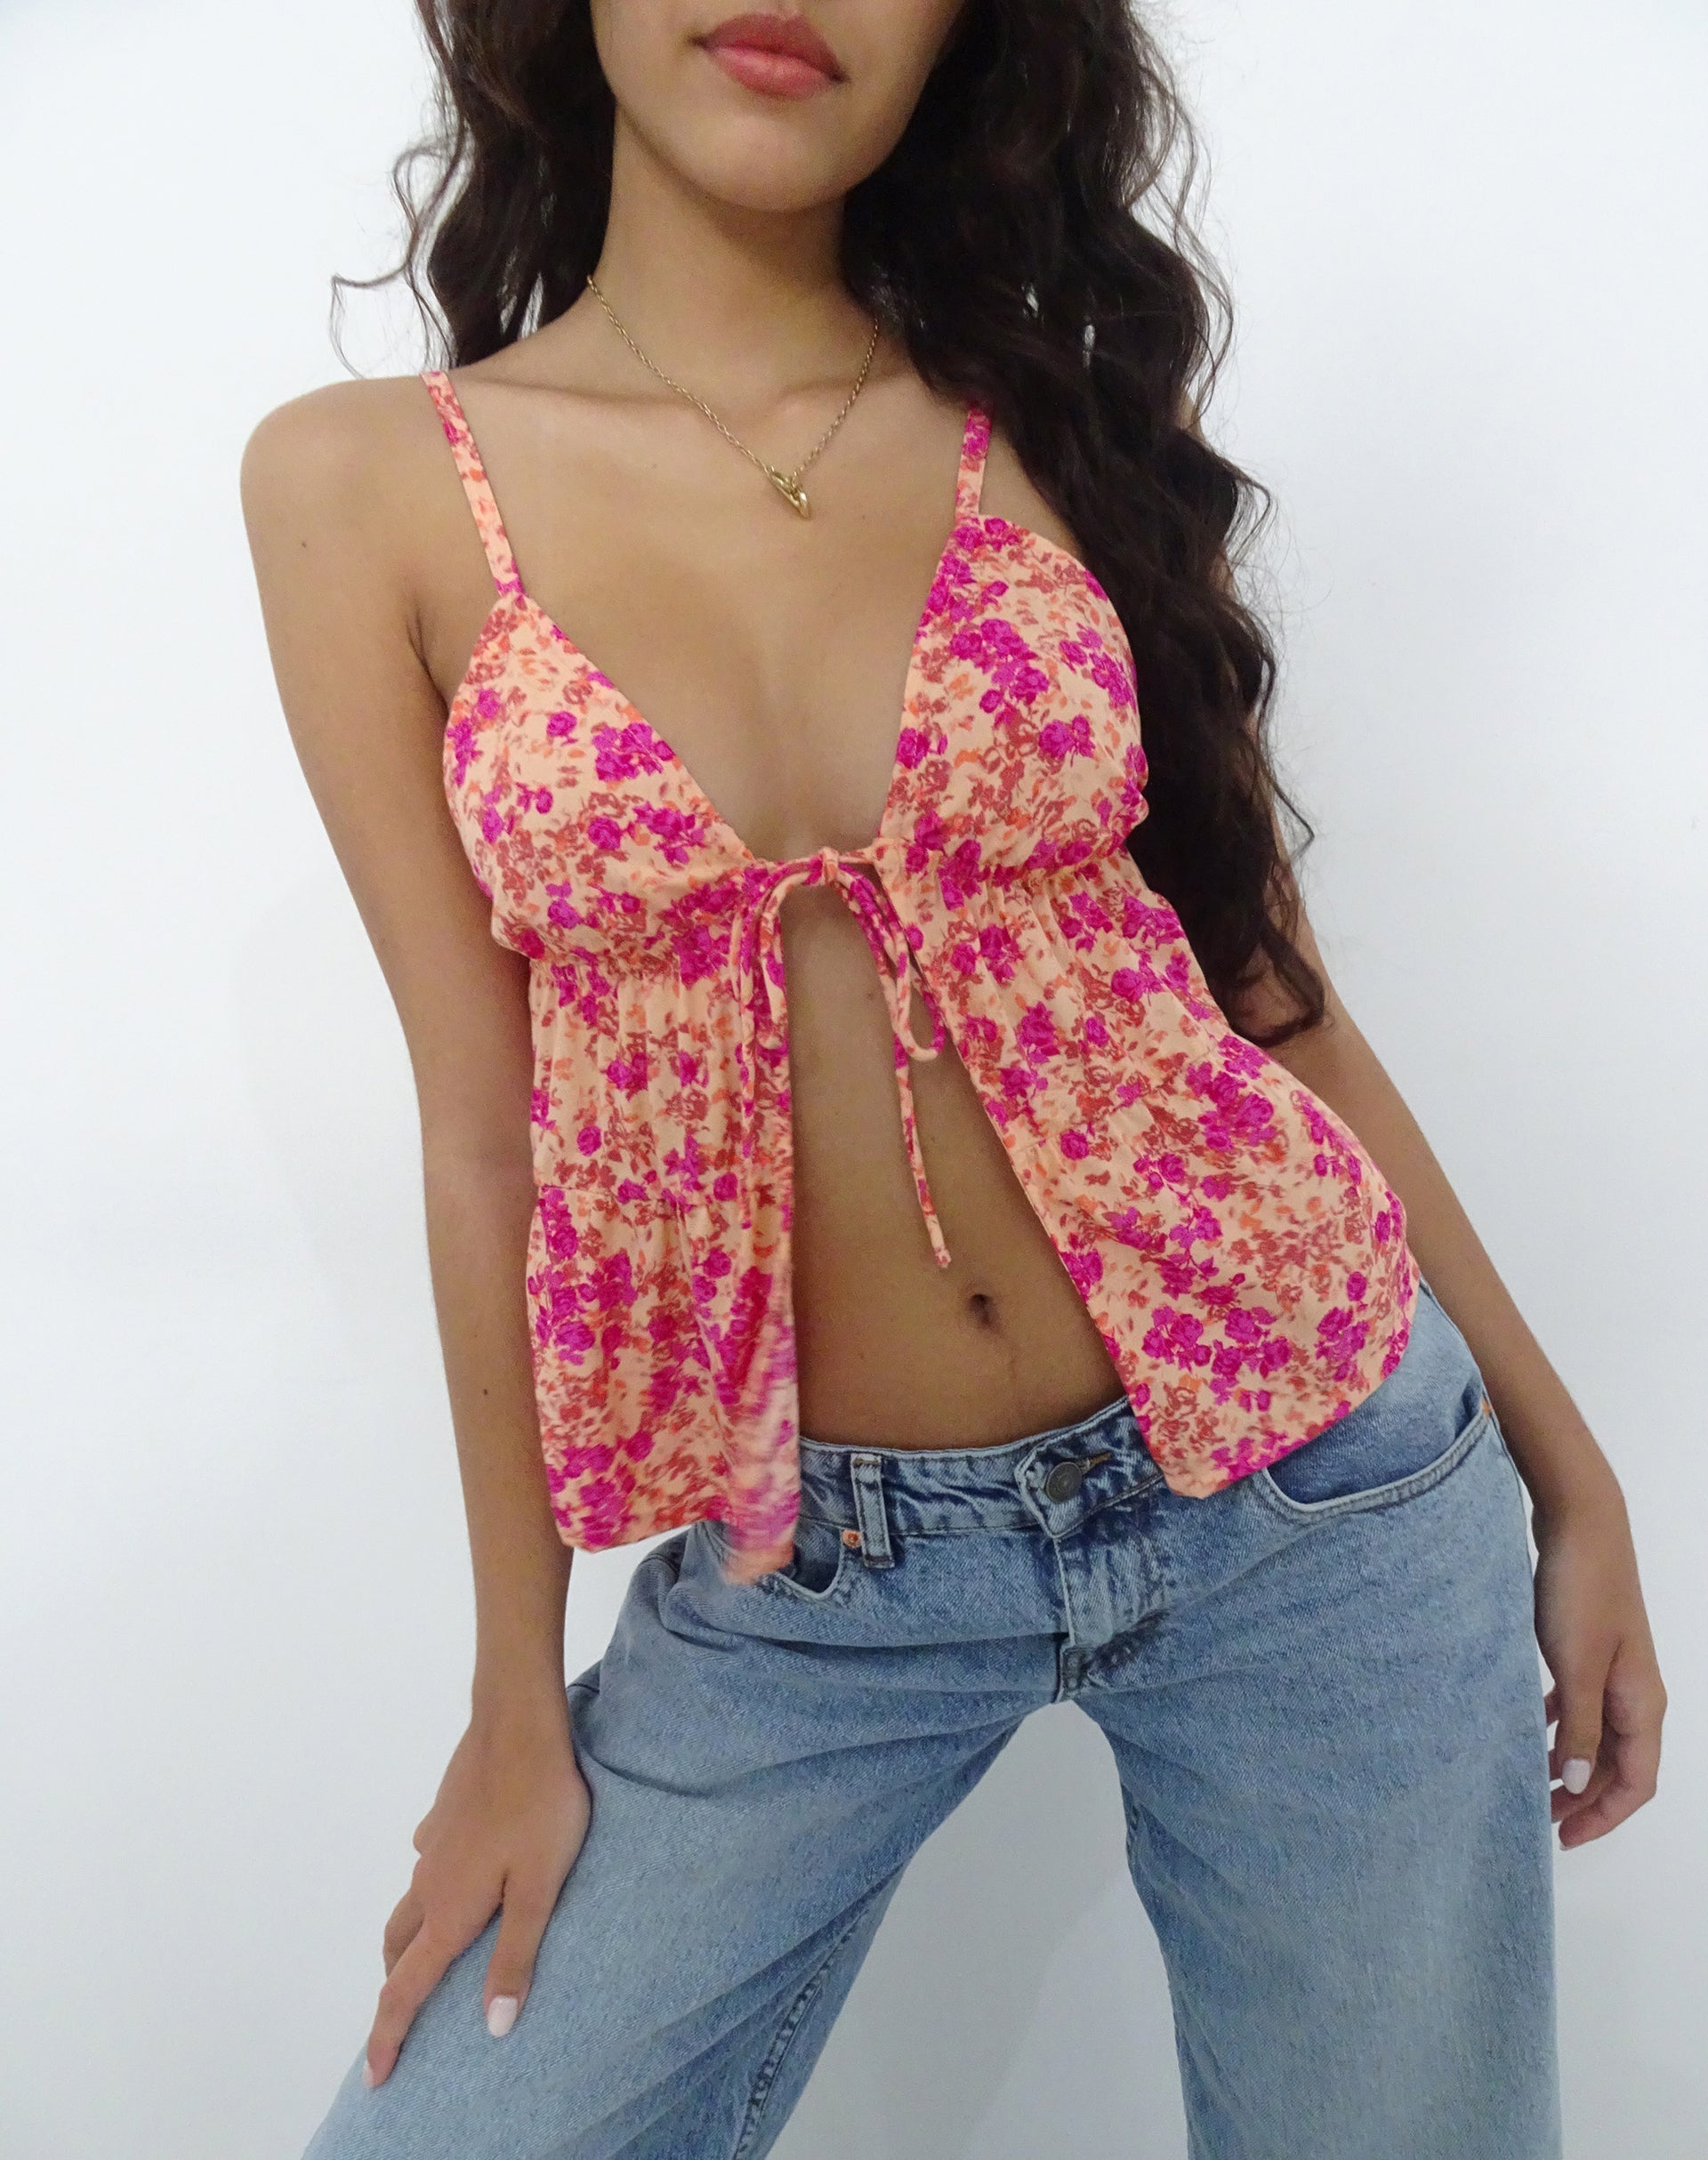 Image of Tezza Tie Front Cami Top in Dark Wild Flower Cantaloupe